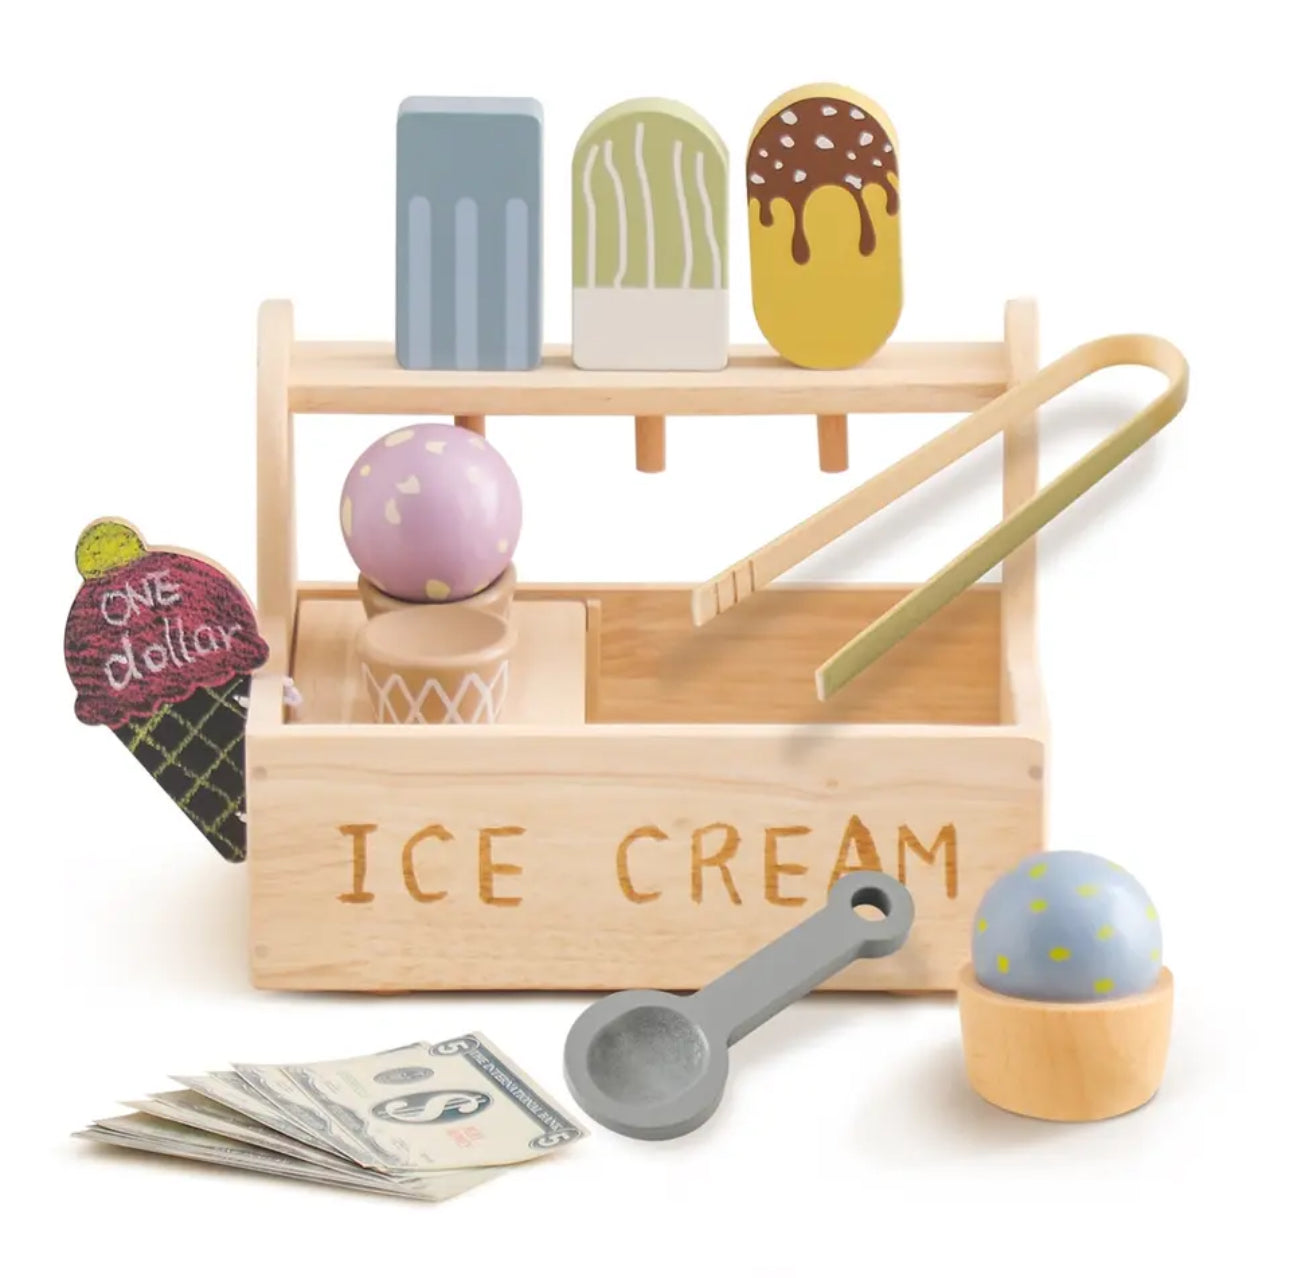 Scoop and Serve - Wooden Ice Cream Shop Kit